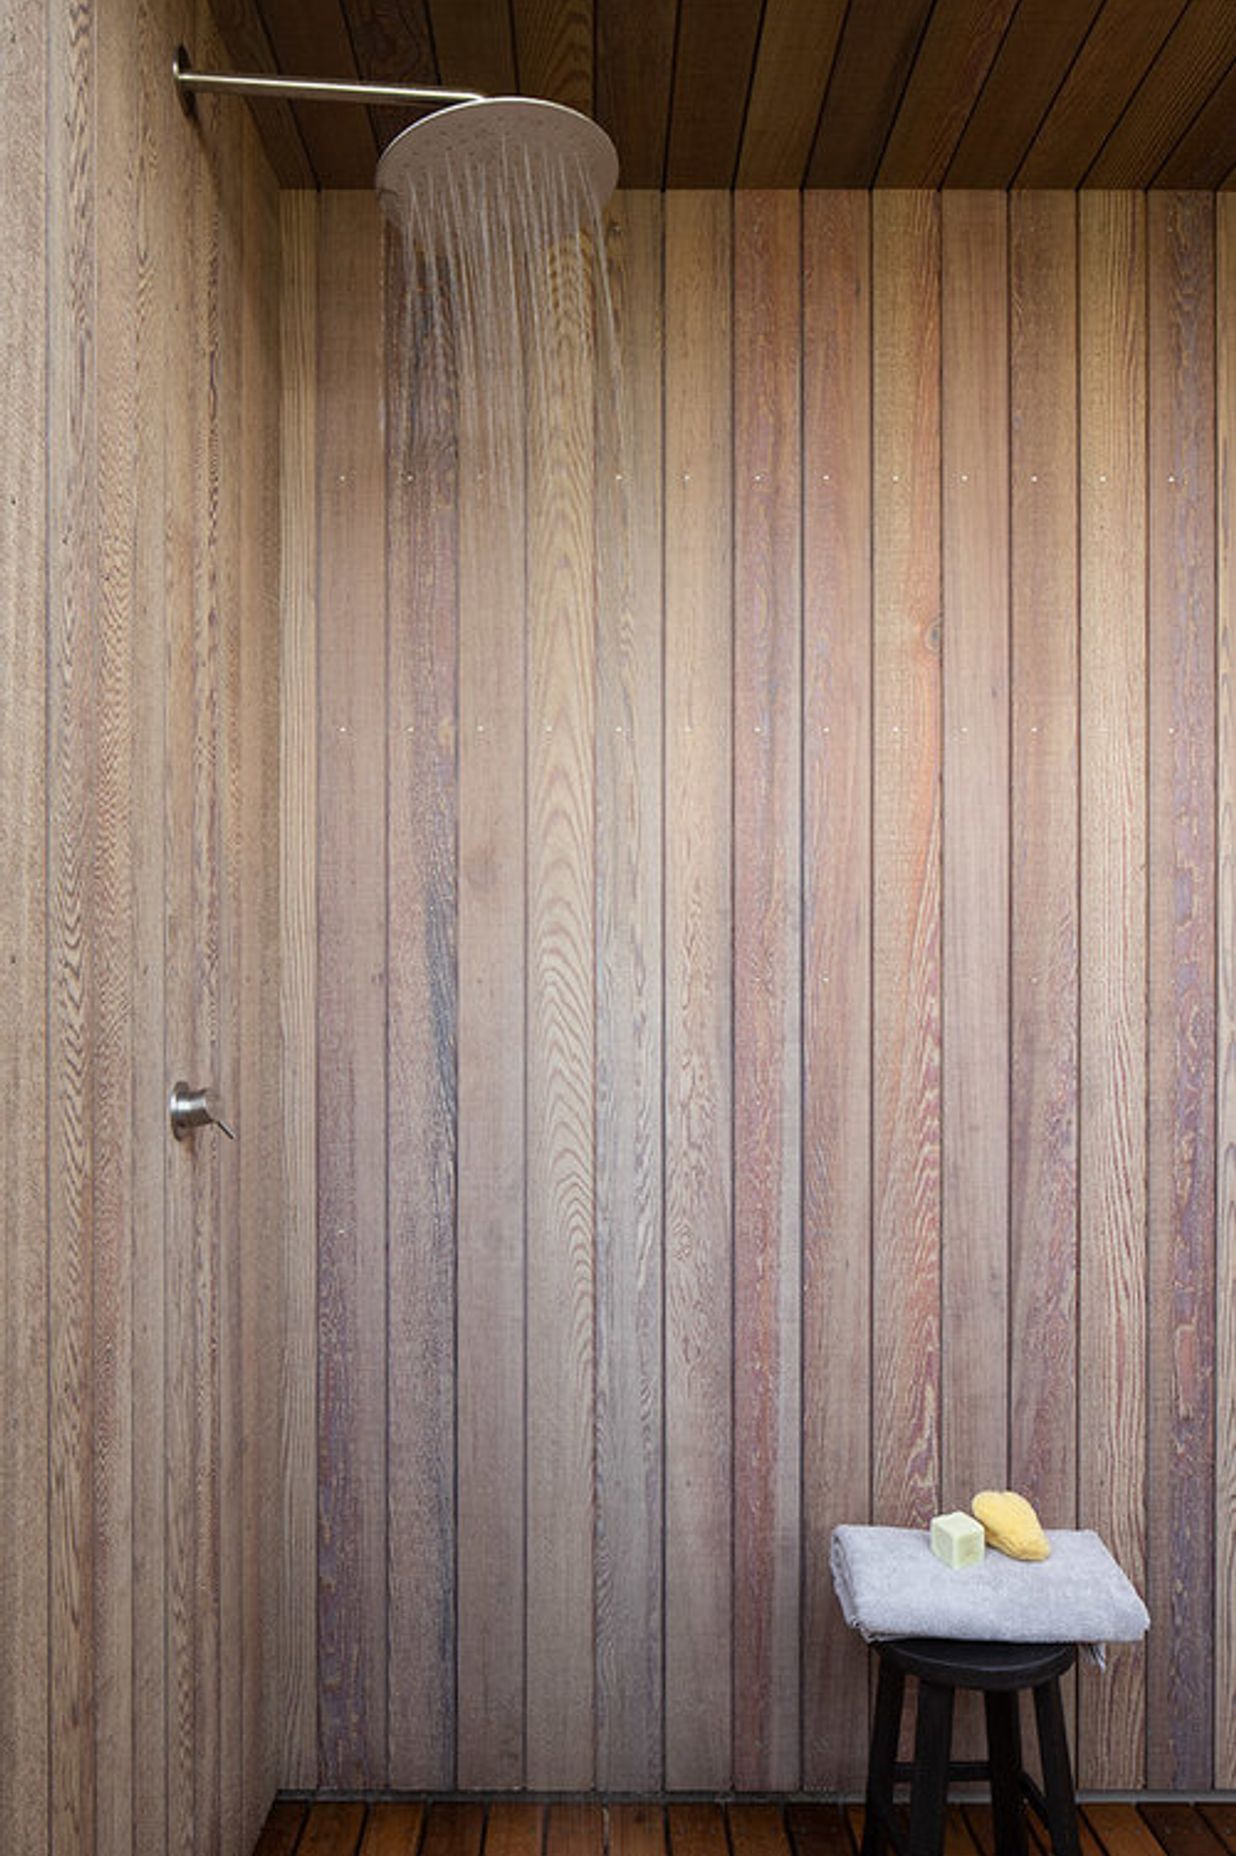 The timber-lined outdoor shower is perfect for washing sand off visits to the beach.